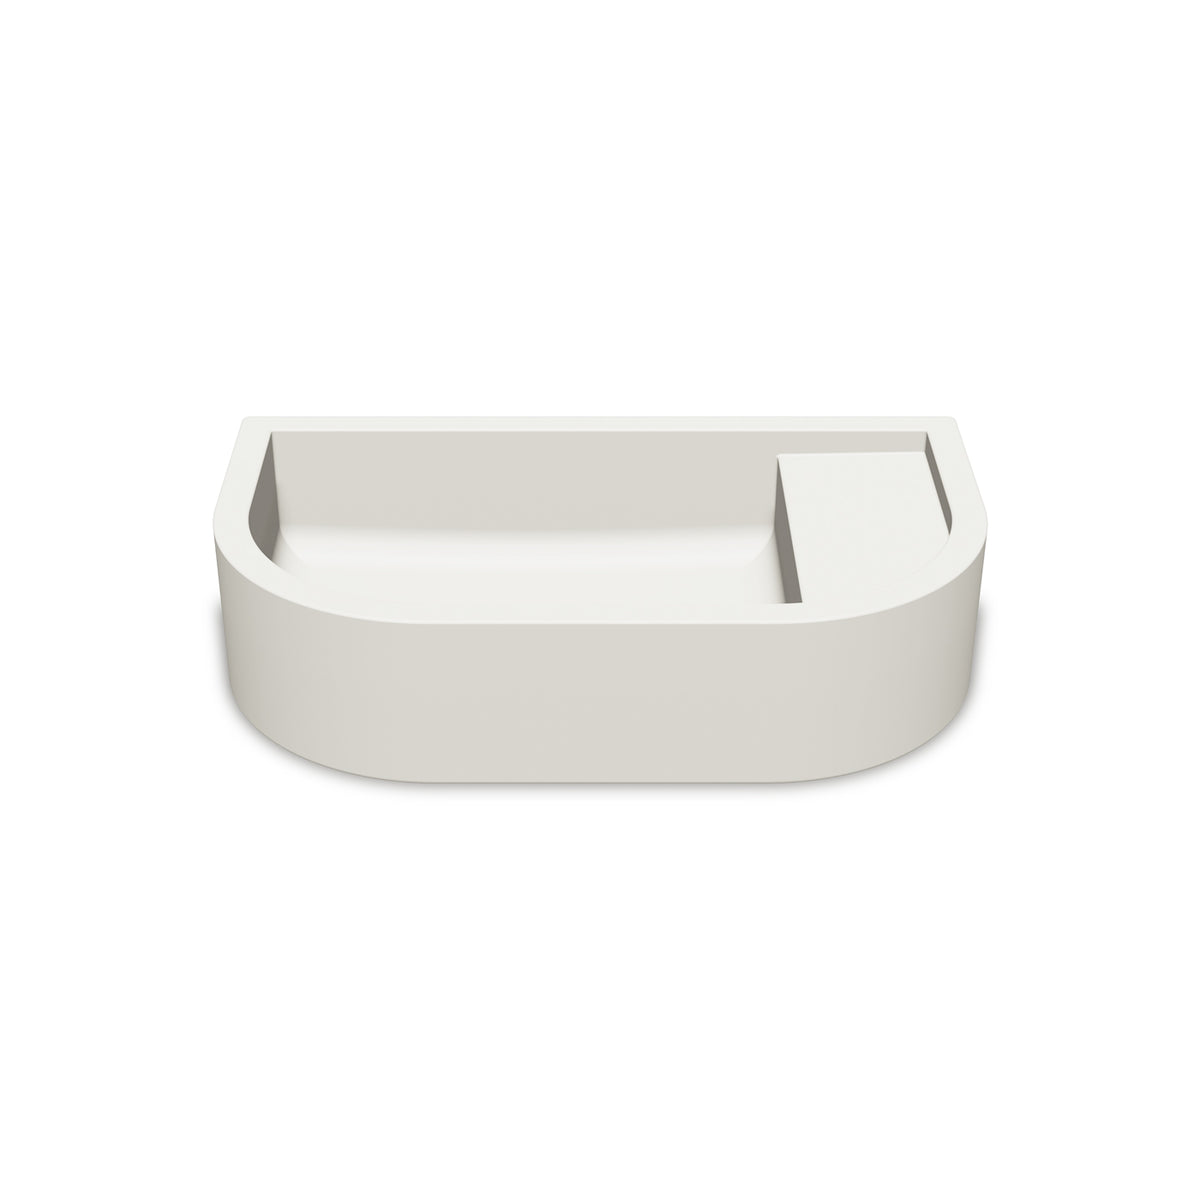 Loop 02 Basin - Overflow - Surface Mount (Ivory,No Tap Hole,Chrome)